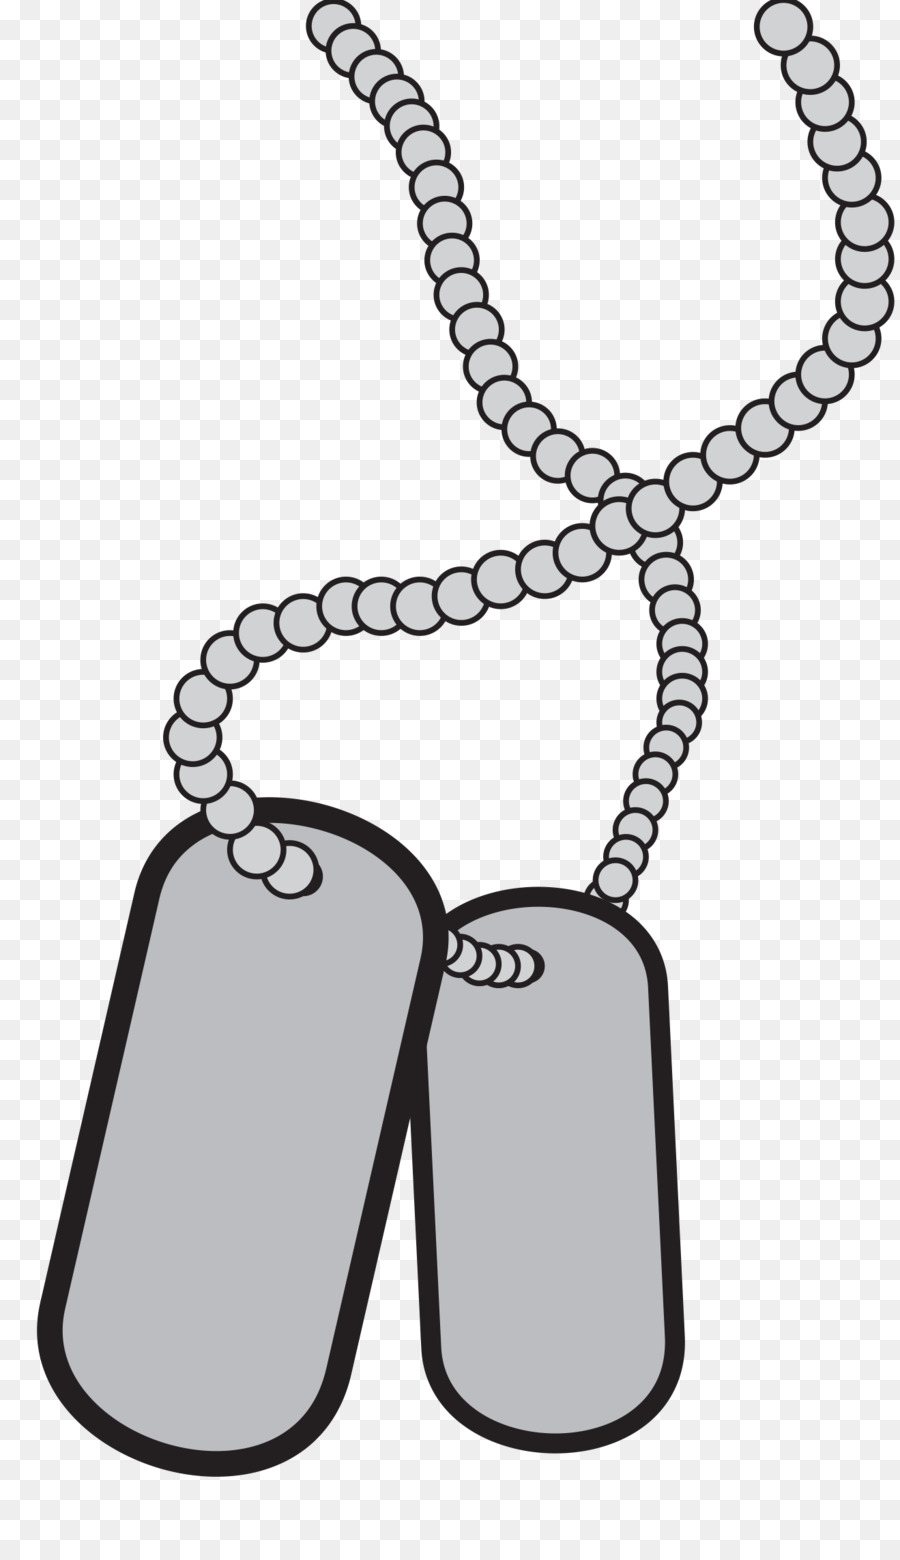 Dog tag Military Soldier Clip art - free tag png download - 1319*2283 - Free Transparent Dog Tag png Download.